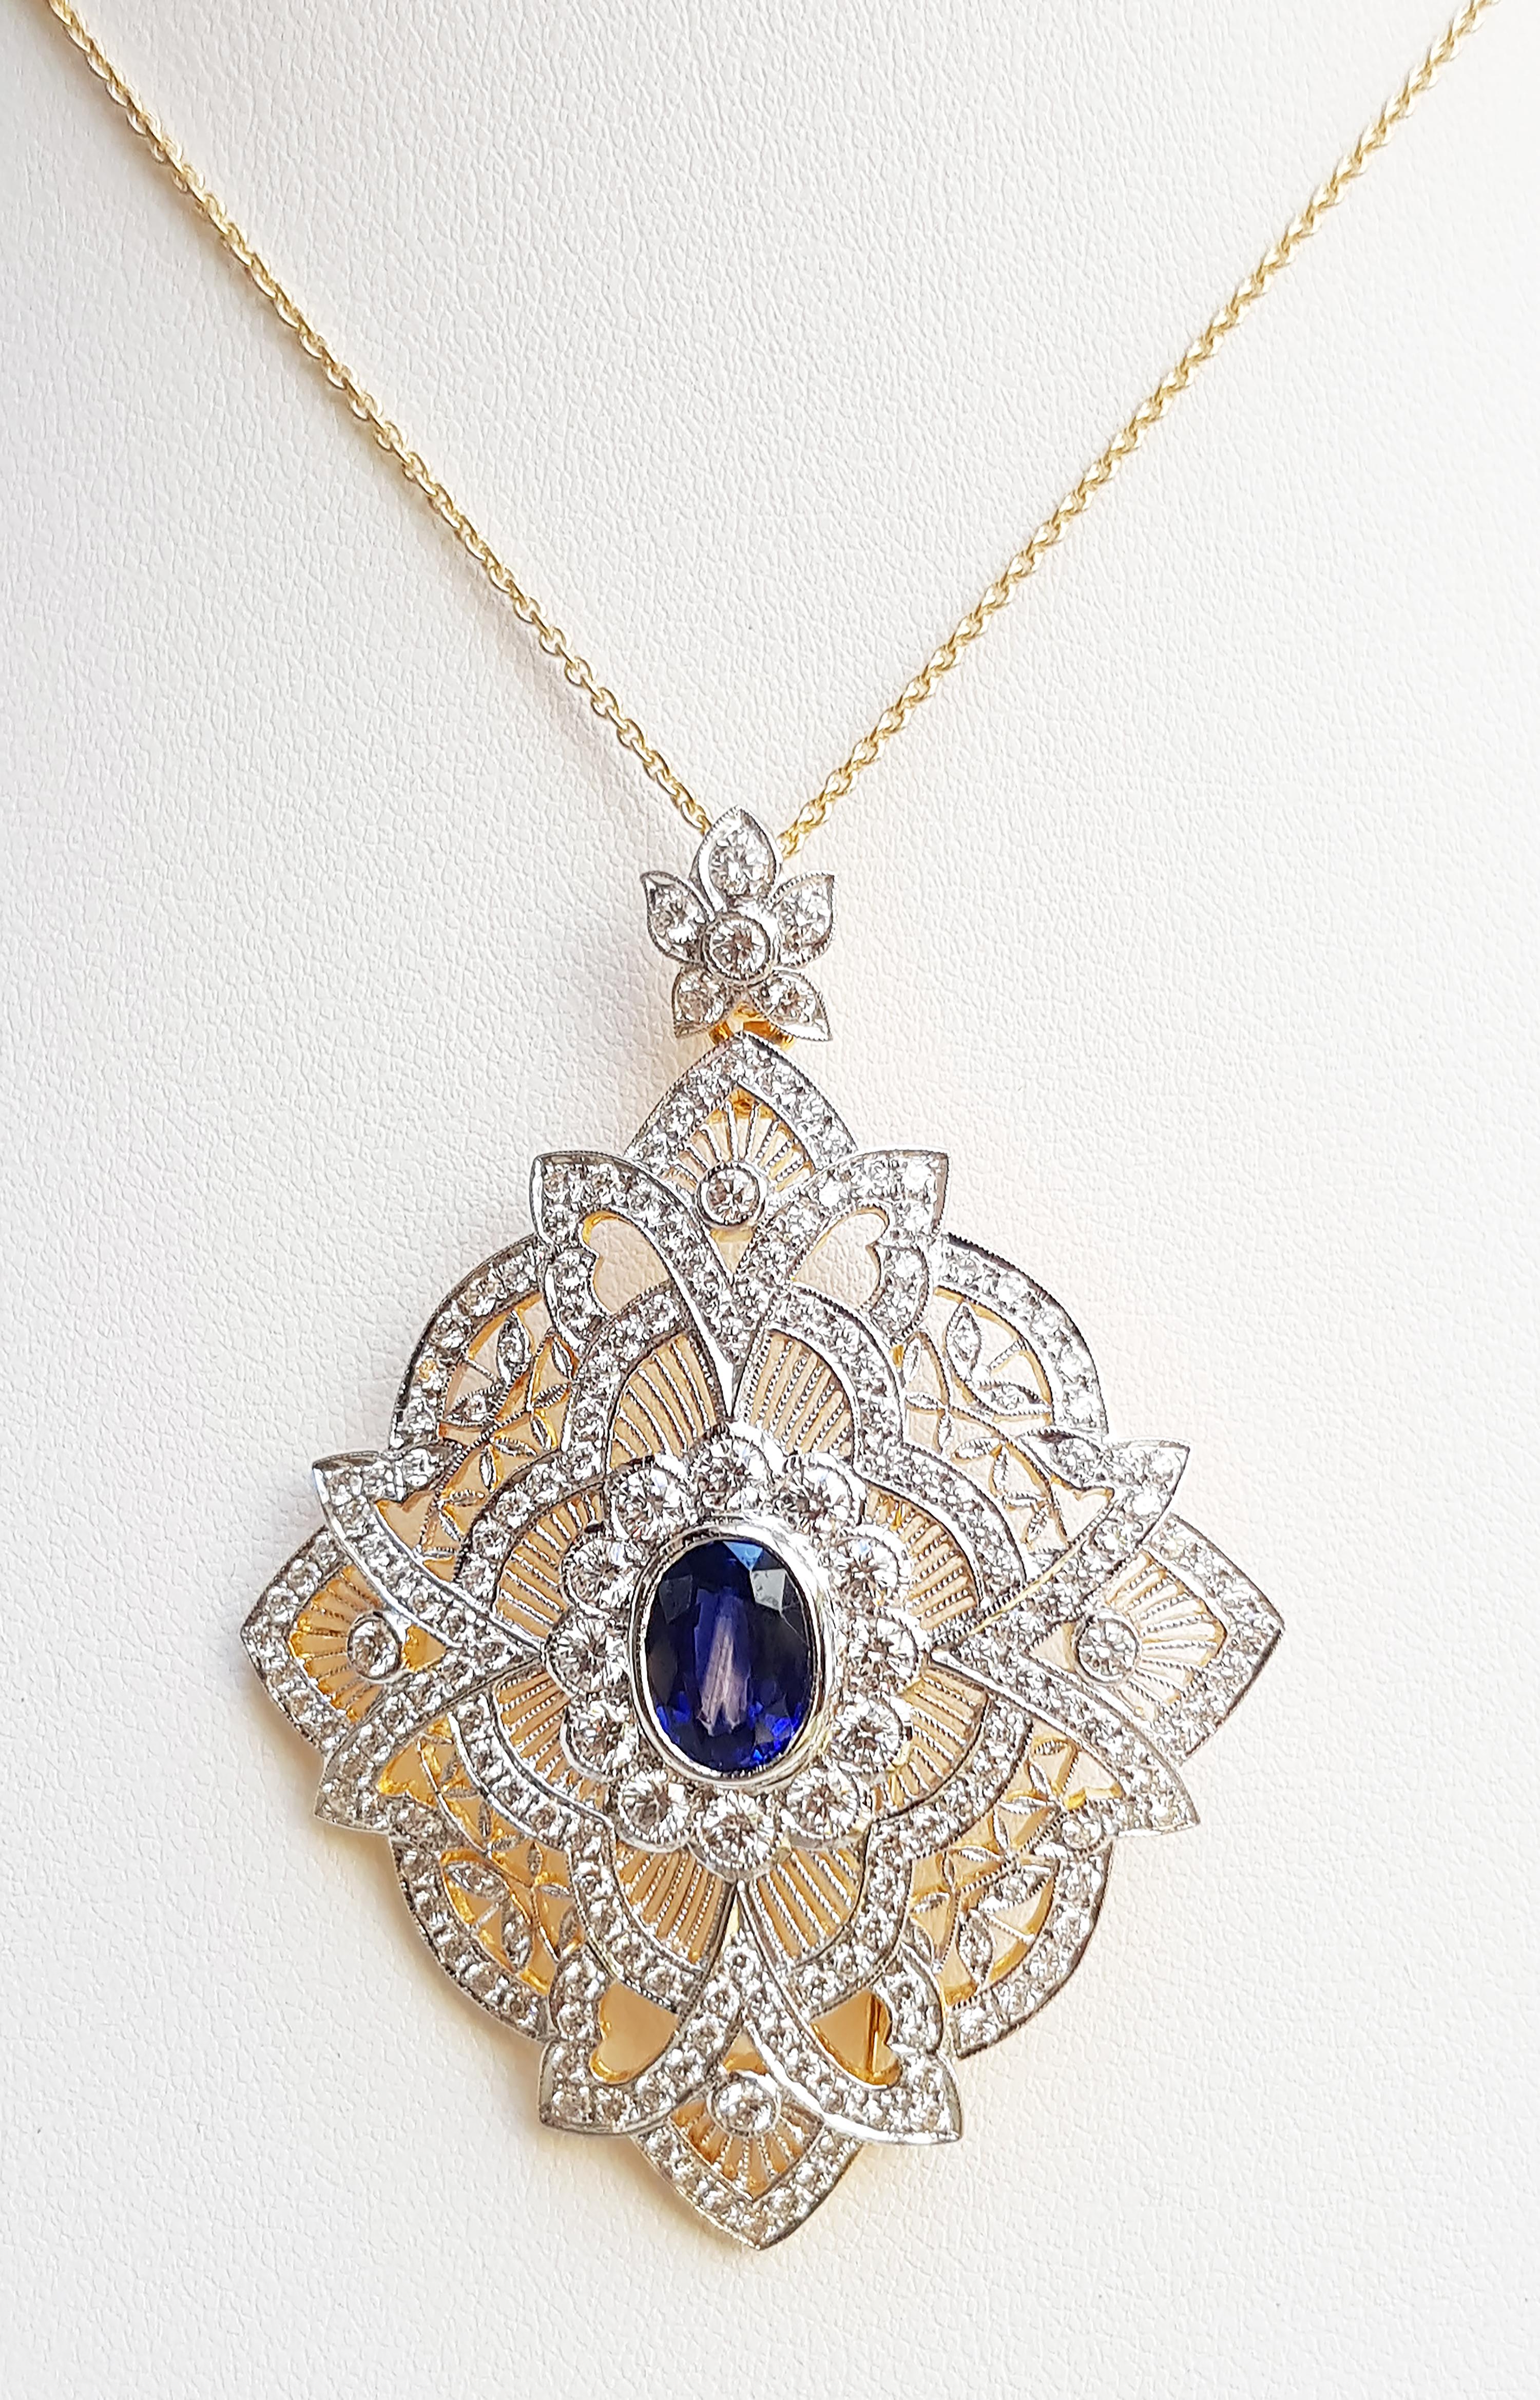 Blue Sapphire 3.18 carats with Diamond 4.55 carats Brooch/Pendant set in 18 Karat Gold Settings
(chain not included)

Width: 5.0 cm 
Length: 6.5 cm
Total Weight: 20.76 grams

